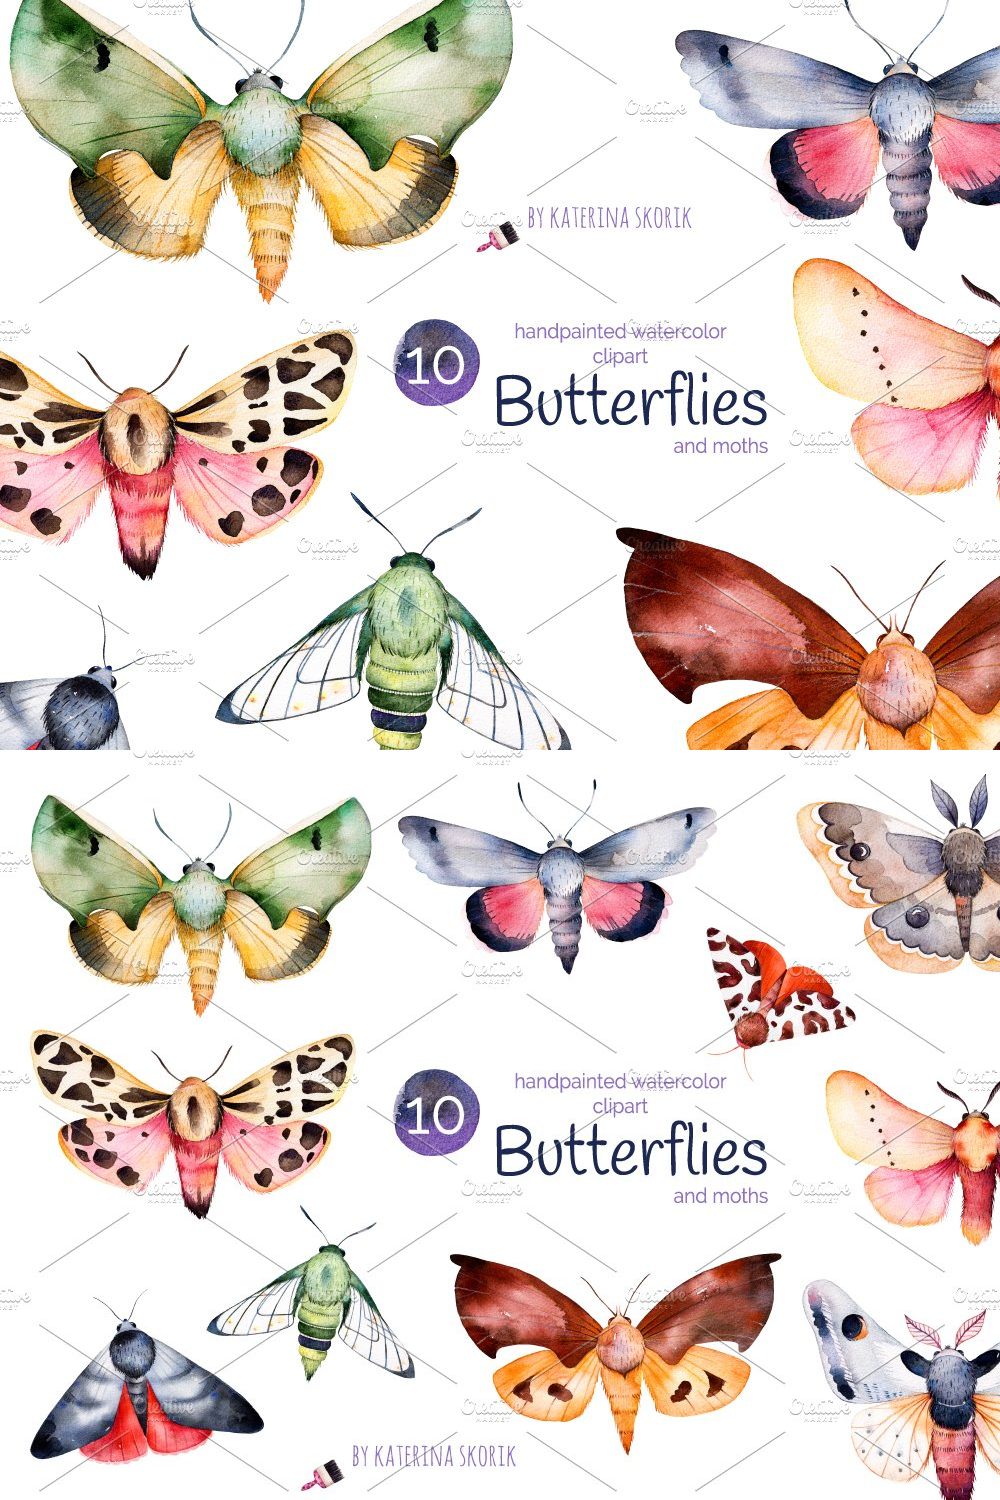 Butterflies and moths pinterest preview image.